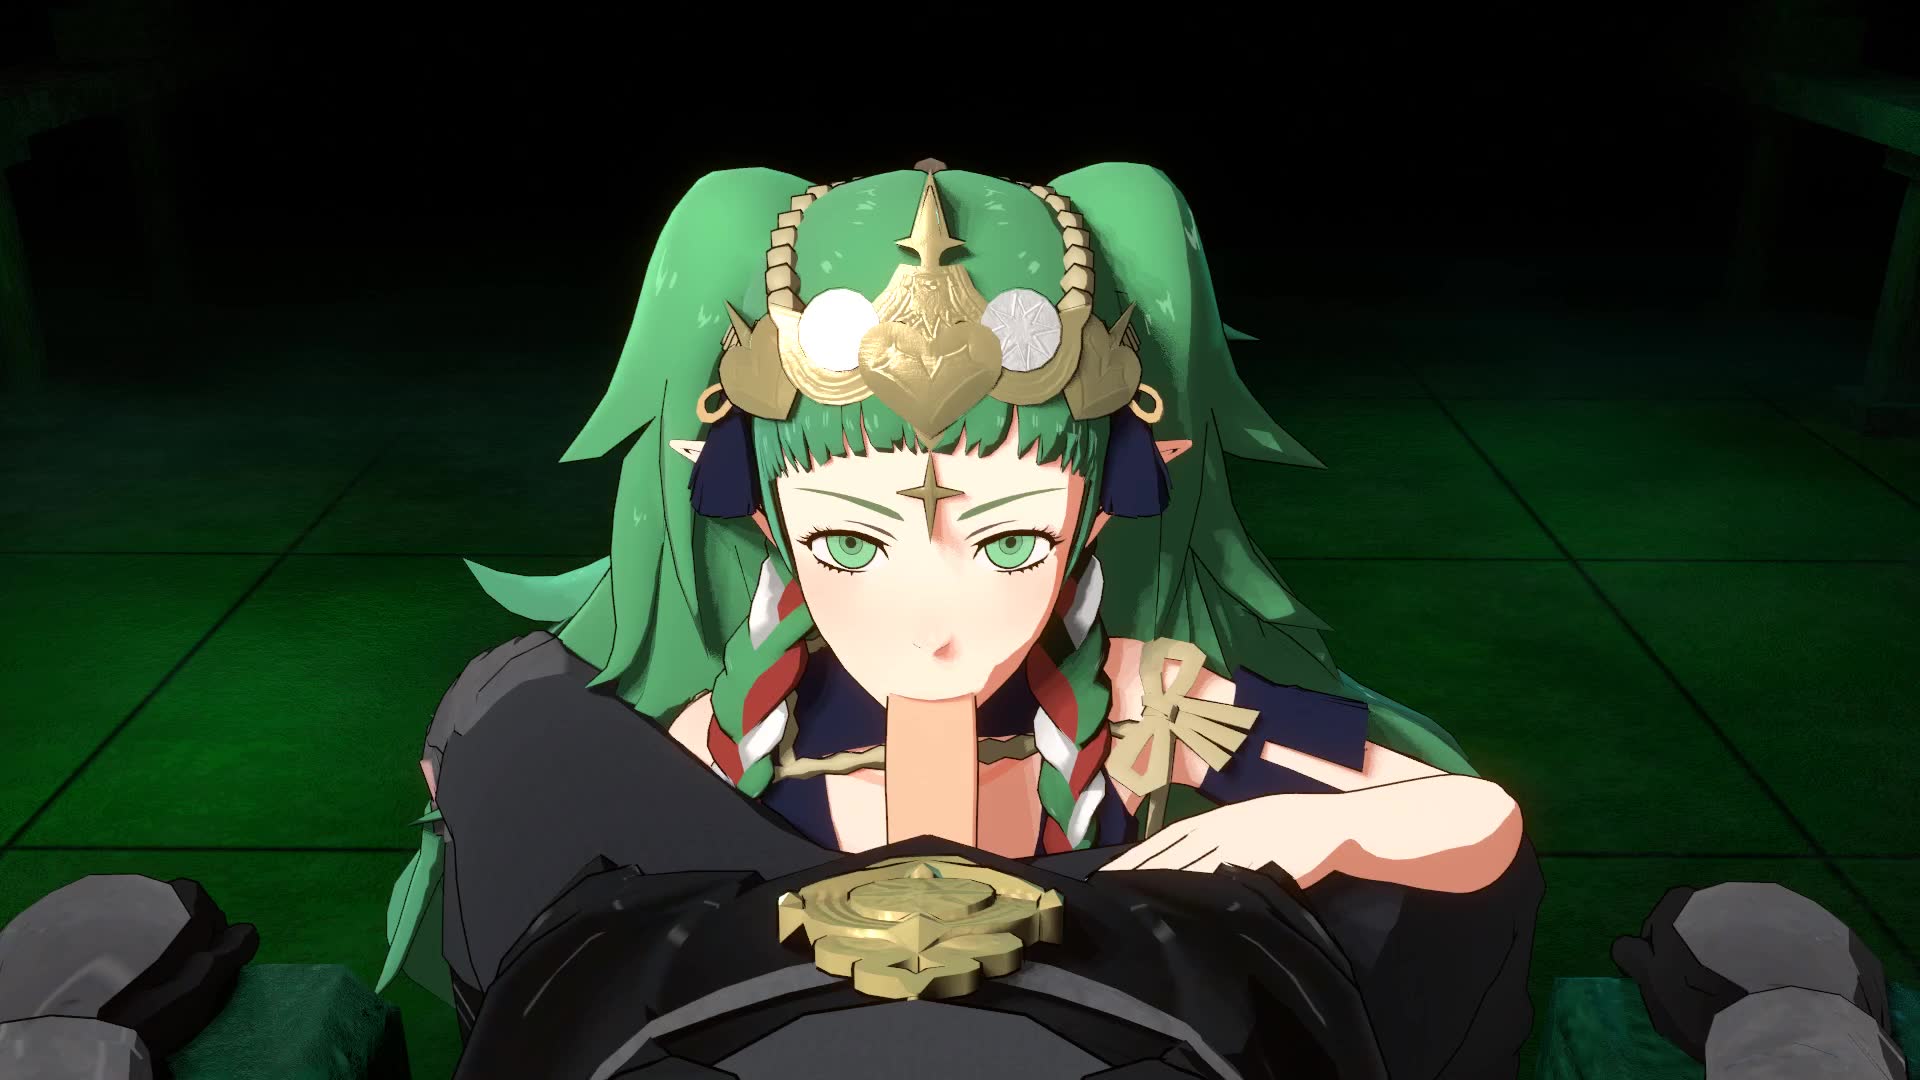 Sothis gives blowjob to Byleth big cock – Fire Emblem NSFW animation thumbnail